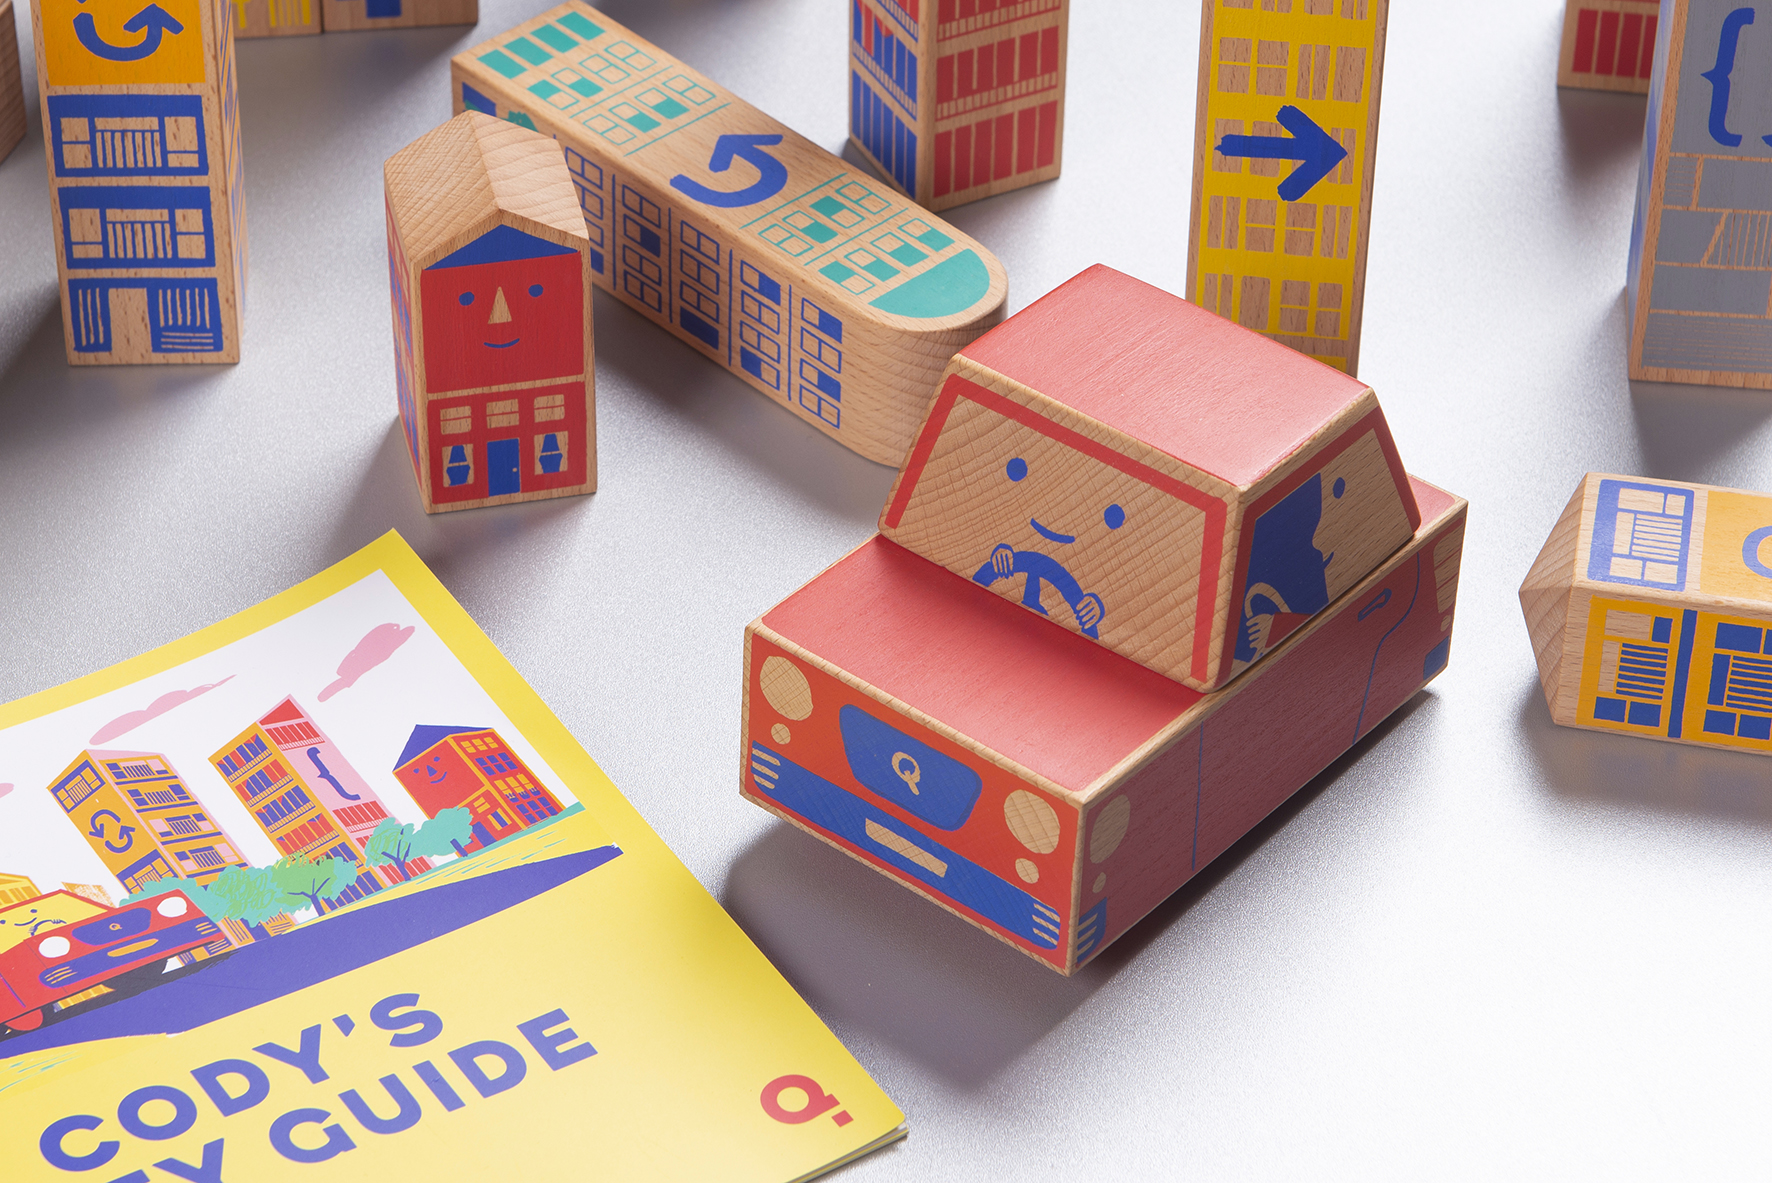 QUBS – The toymaker merging conventional designs and screen-free expertise in early years studying